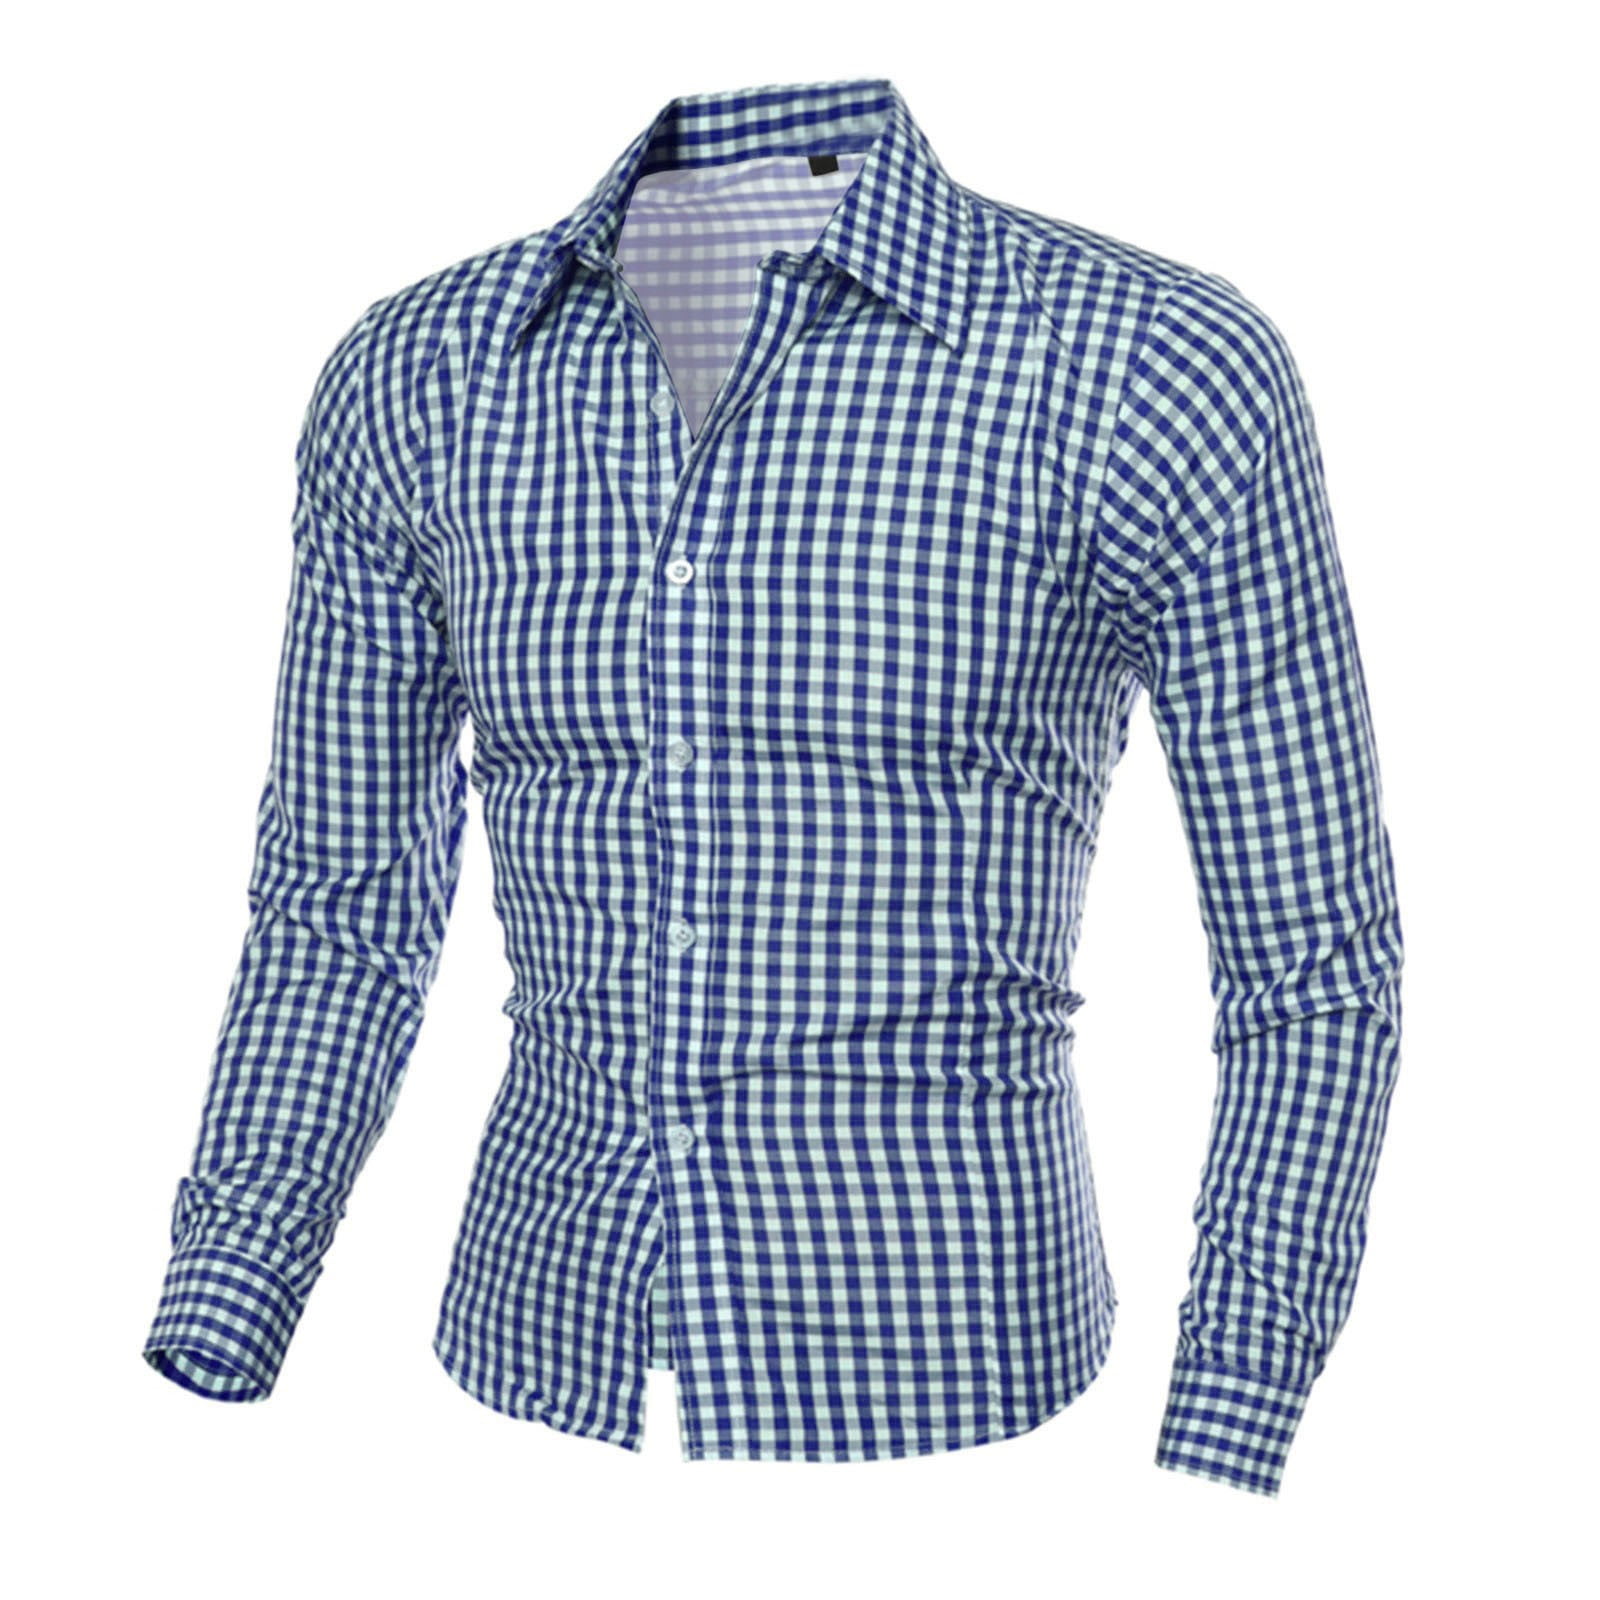 Mens Long Sleeved Plaid Self Cultivation Shirt Top Blouse Blouse Top ...